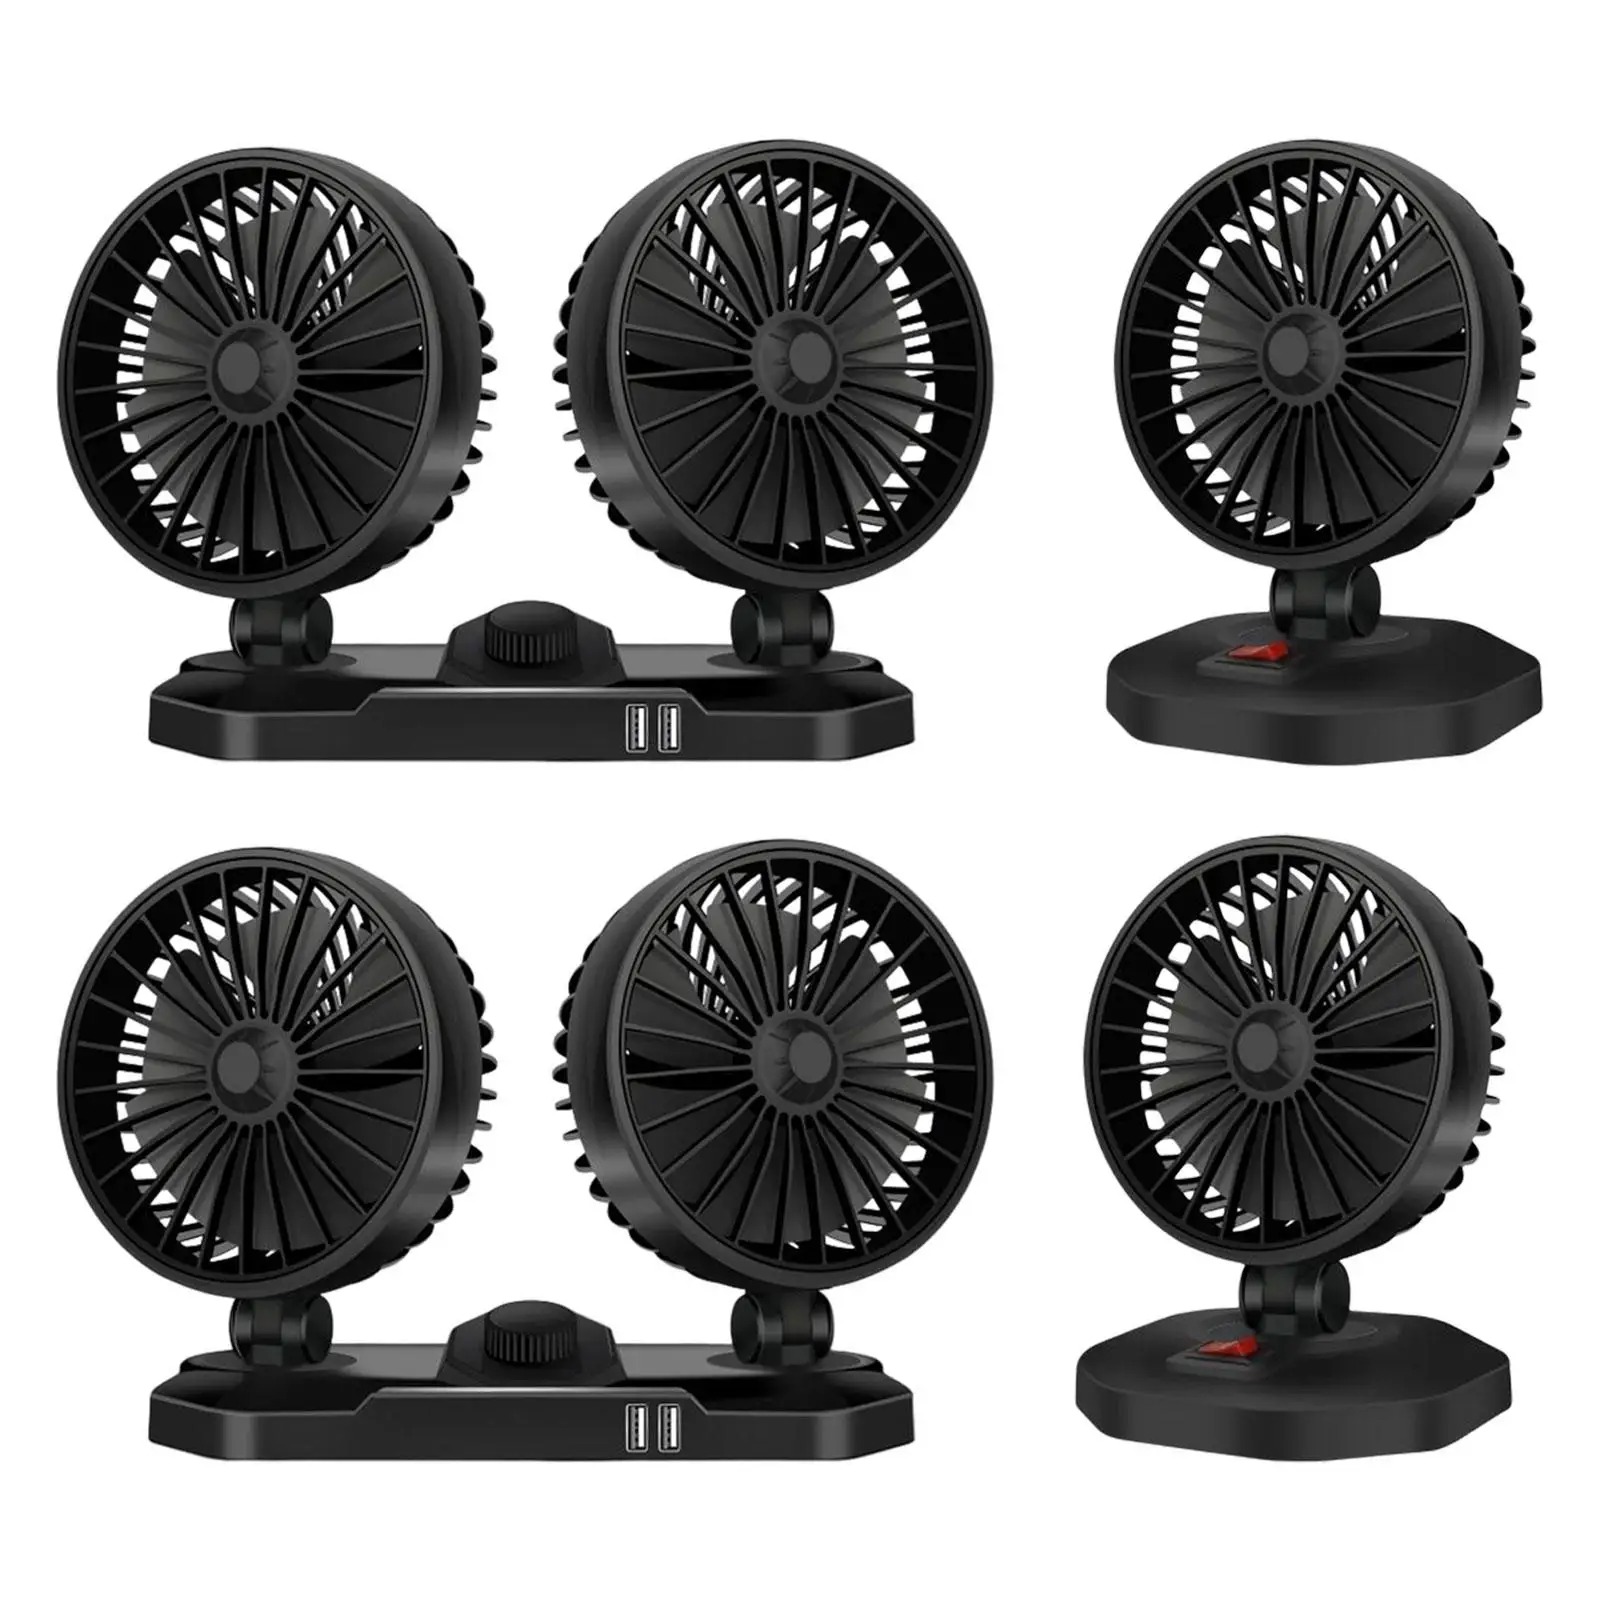 Small Car fan Degree Rotatable Personal Strong Wind Cooling air Fan for Vehicles Boat Dashdoard Sedan Office